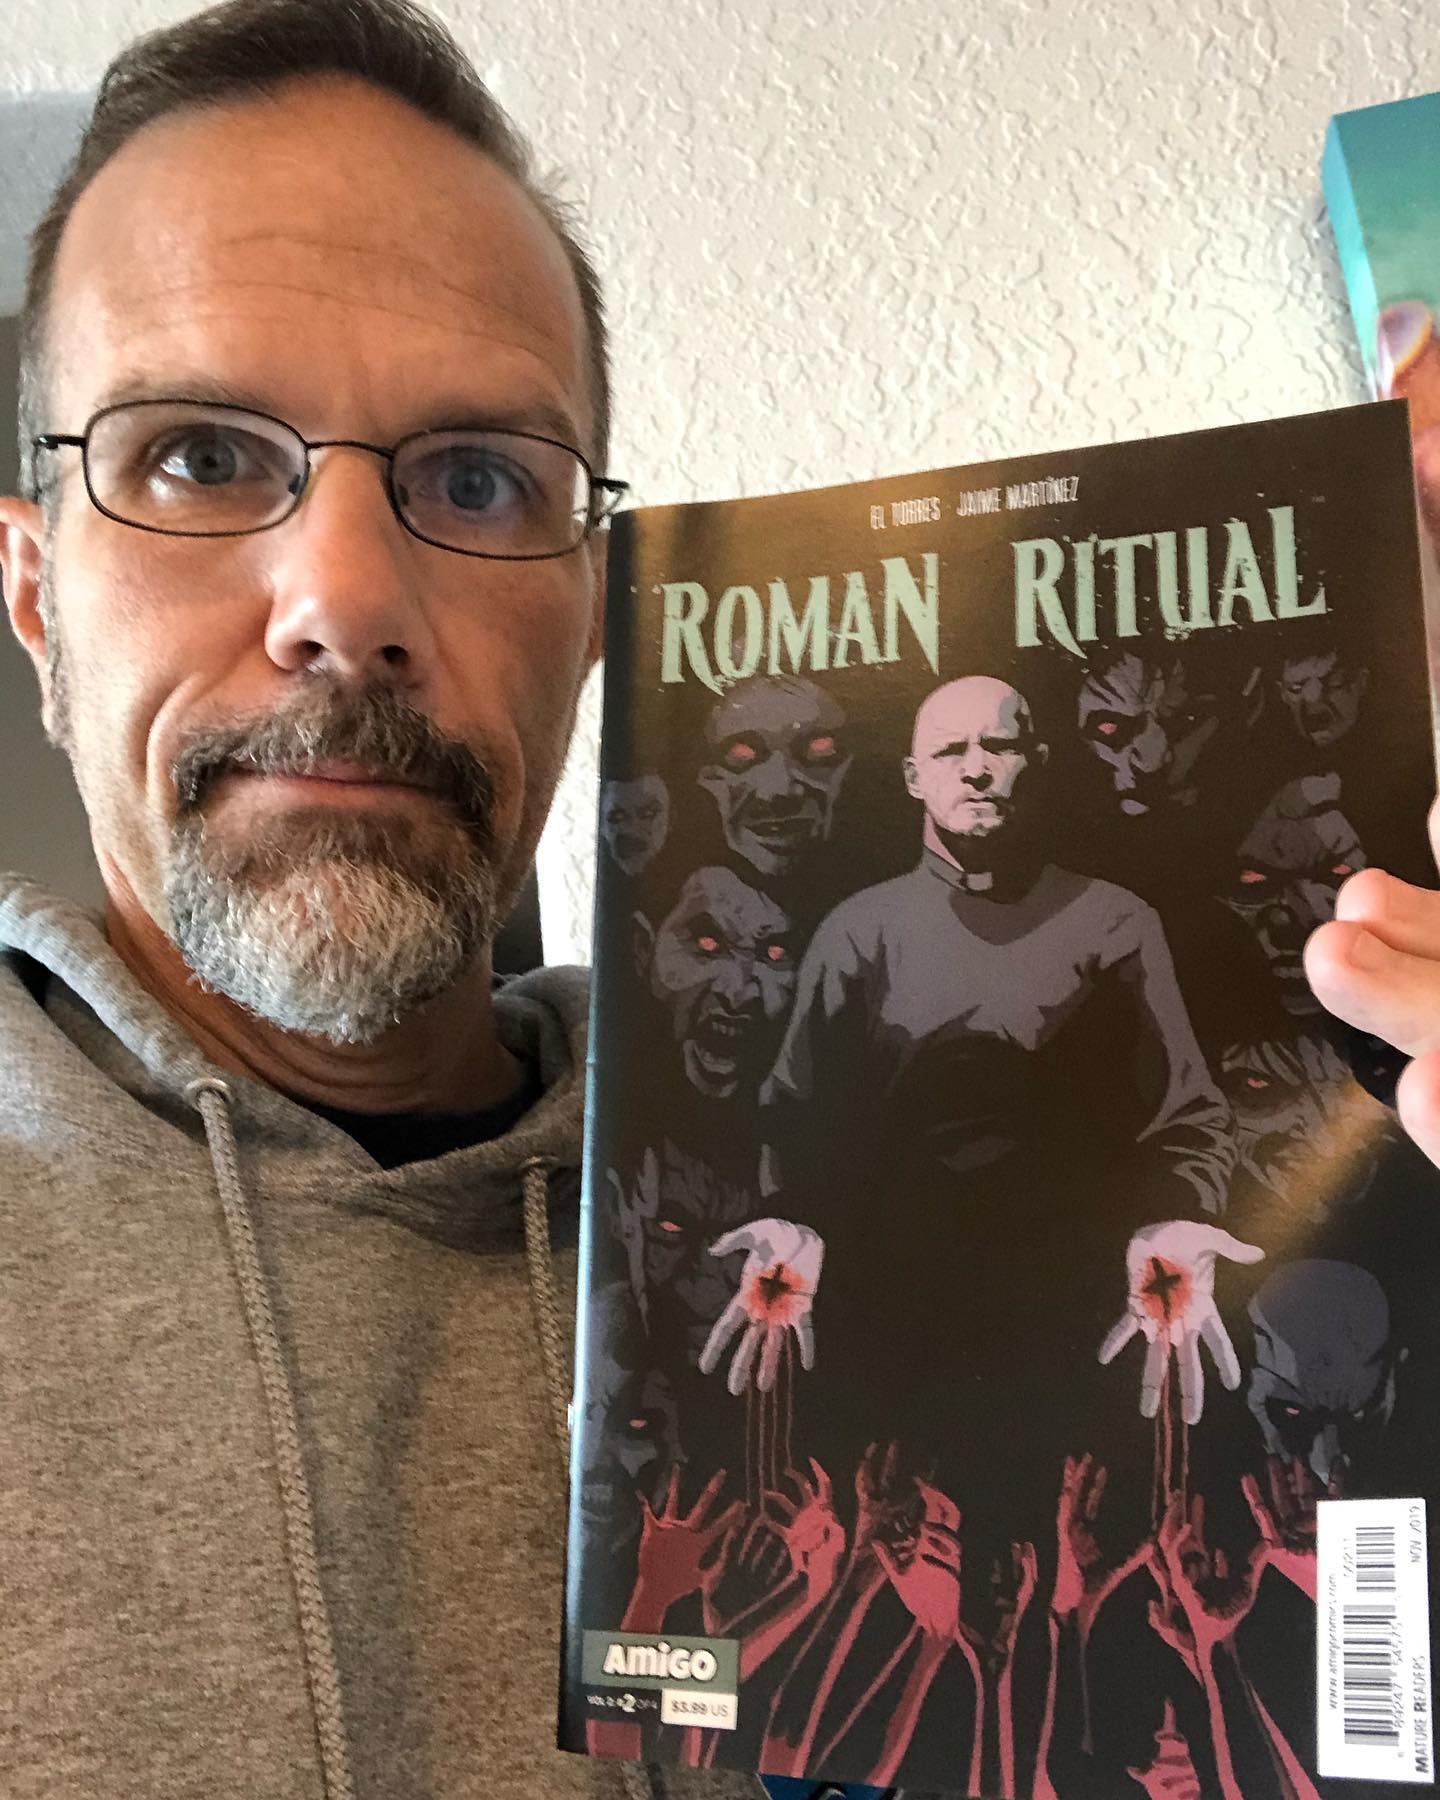 Check out: Roman Ritual Volume 2 written by Juan Torres (El Torres) with artwork by Jaime Martínez edited by Andrea Lorenzo Molinari